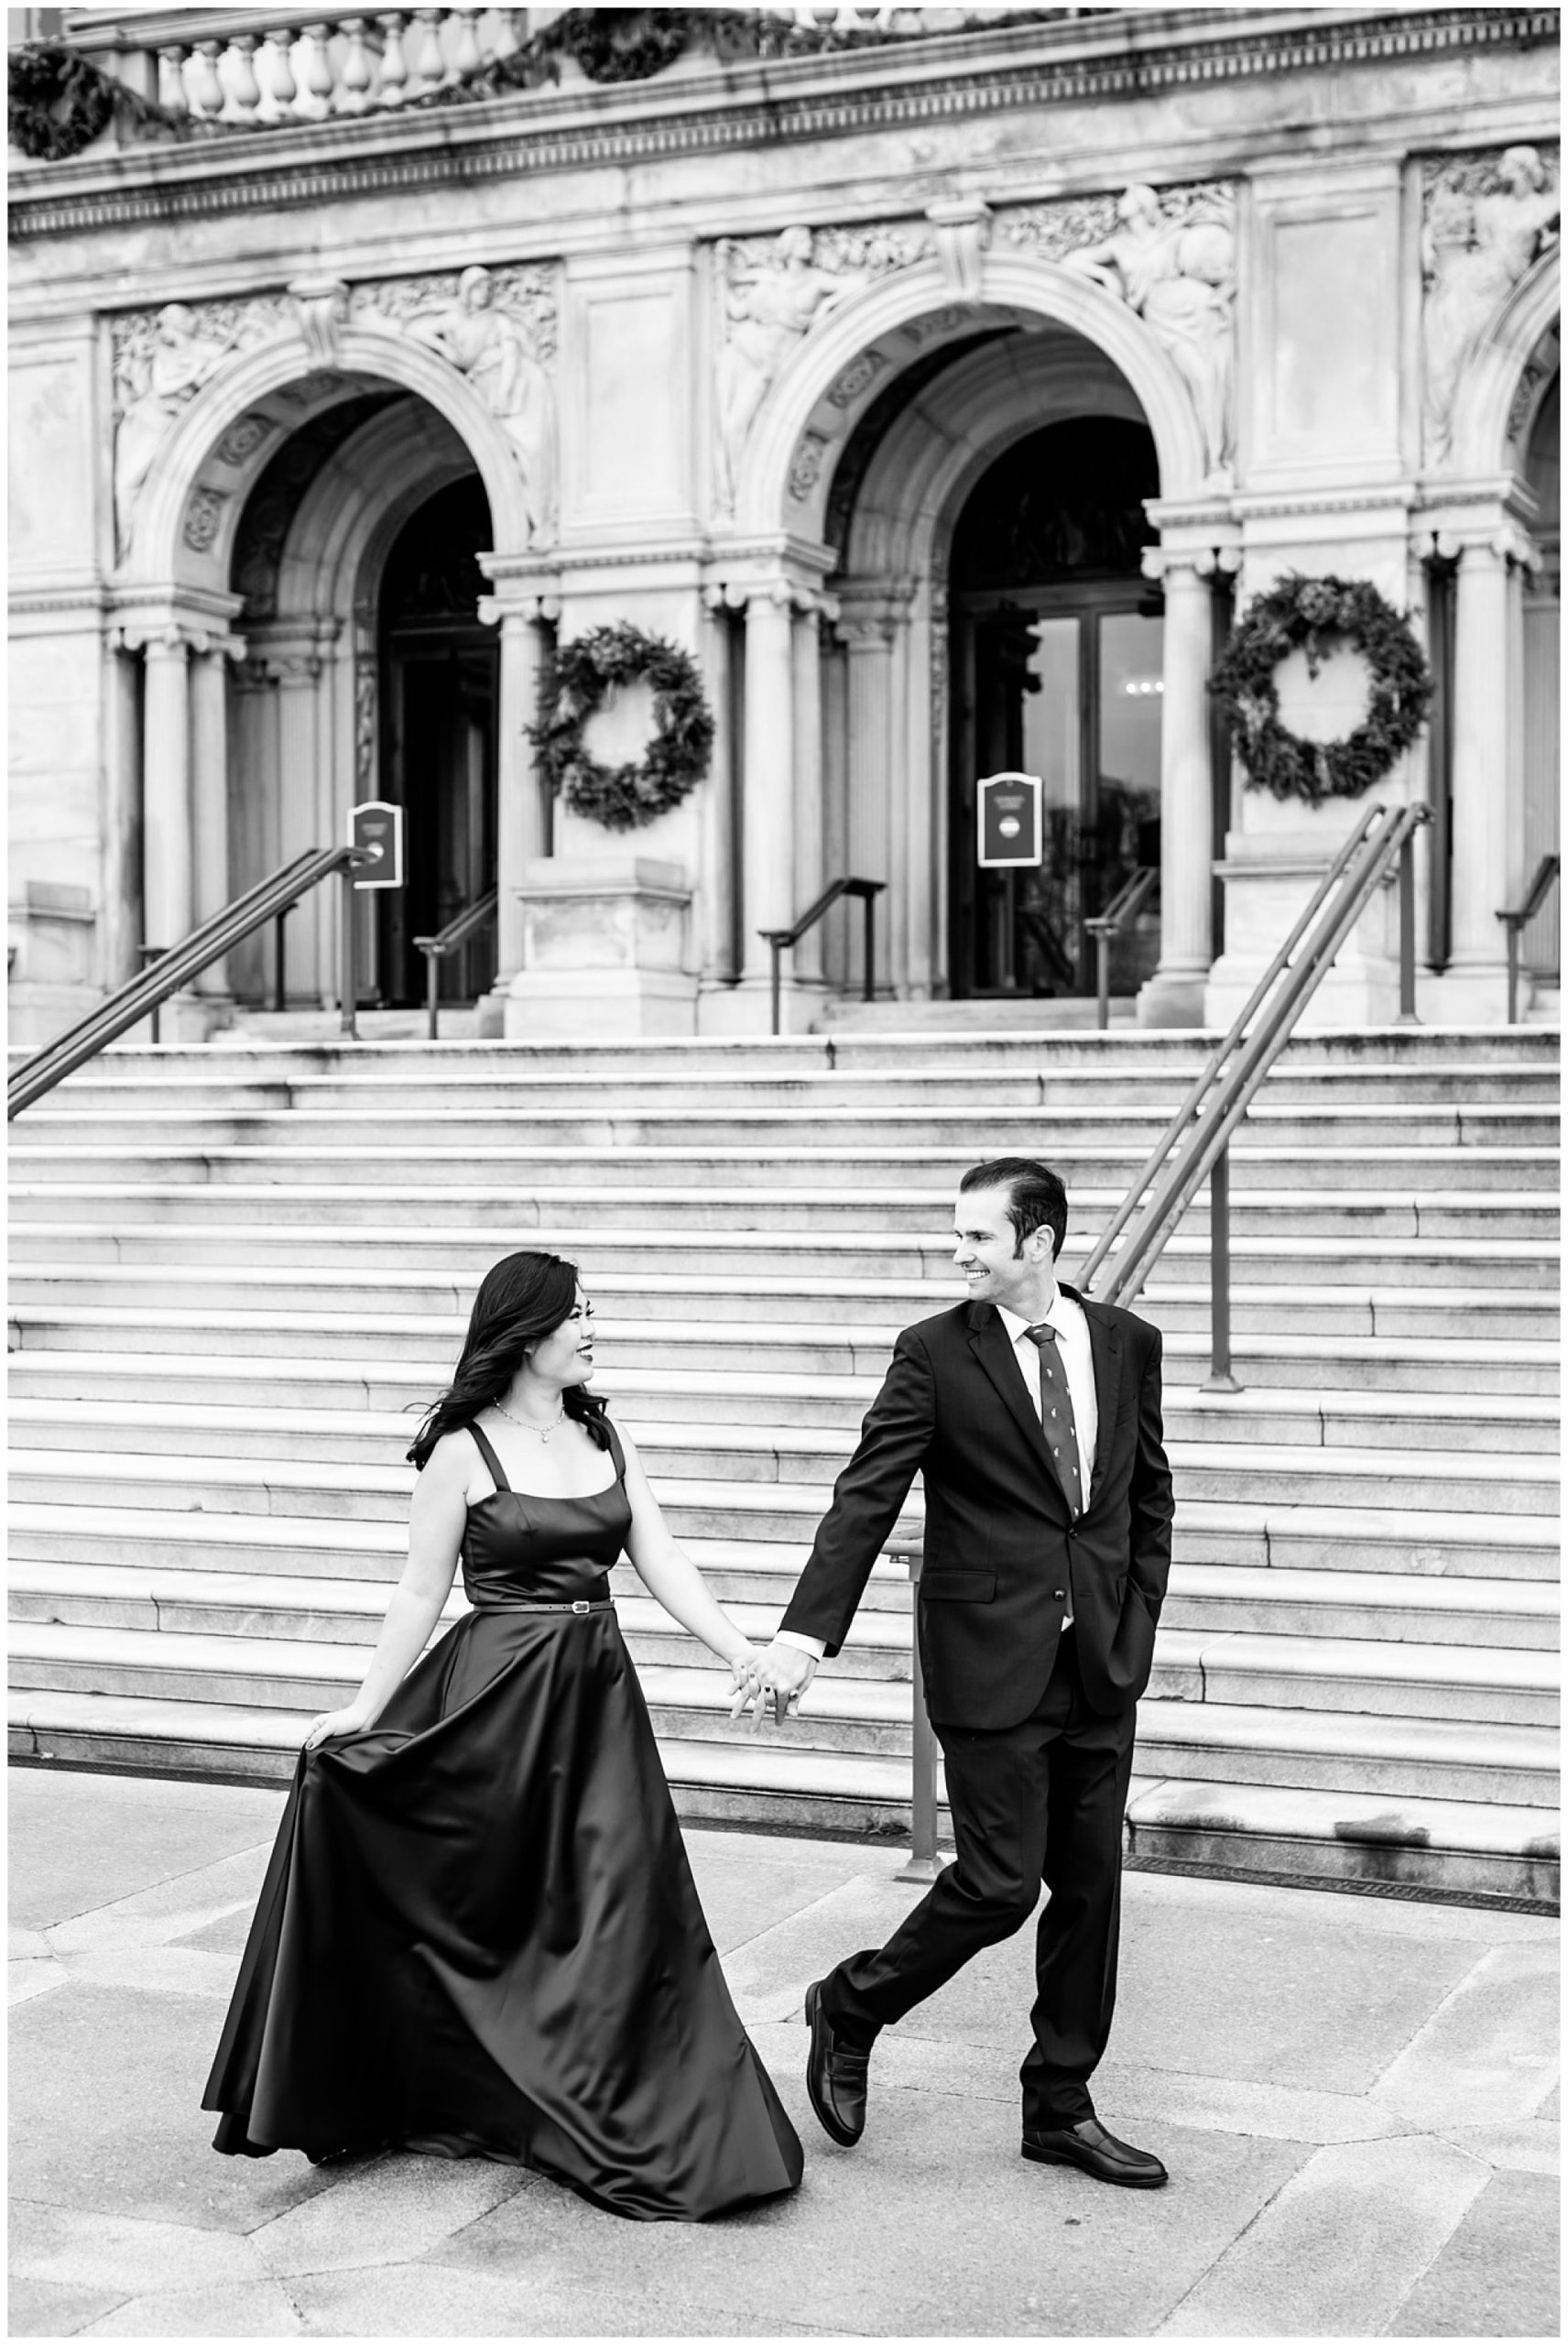 formal Capitol Hill engagement photos, formal engagement photos, Capitol Hill engagement session, Capitol Hill photographer, Washington DC engagement photos, DC wedding photographer, DC engagement photographer, classic engagement photos, fancy engagement photos, formal wear, engagement session outfits, Rachel E.H. Photographer, black and white engagement photos, ballgown, Library of Congress,